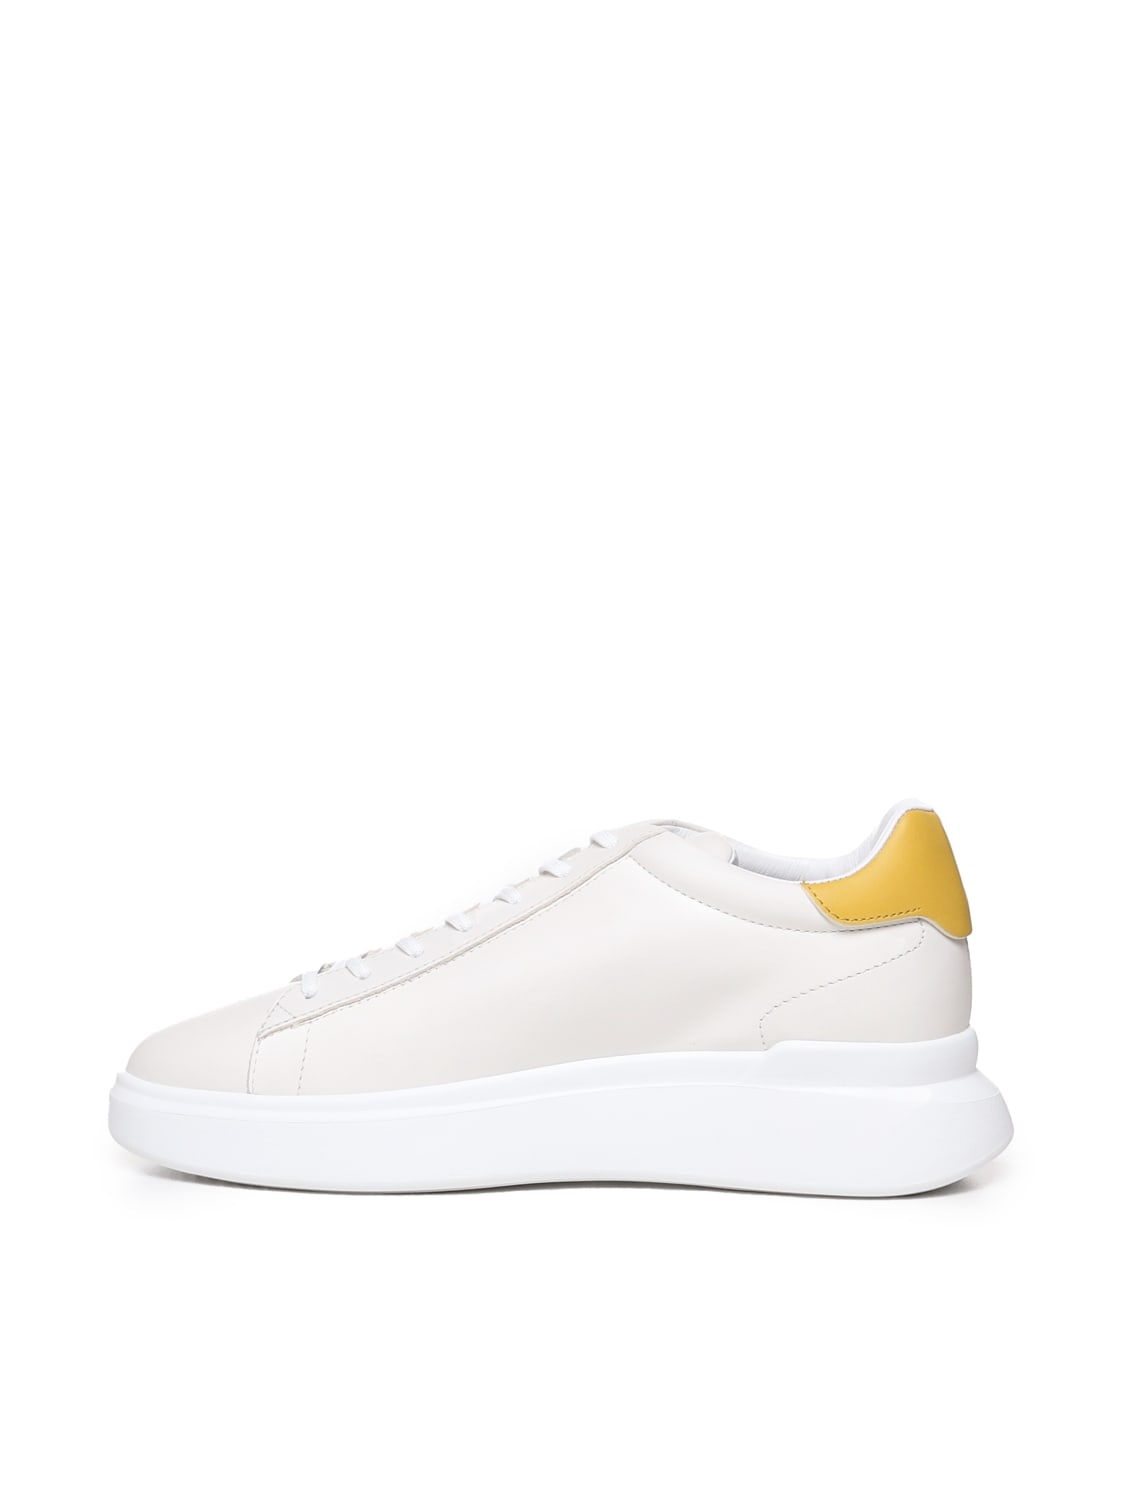 Shop Hogan H580 Sneakers In White, Yellow